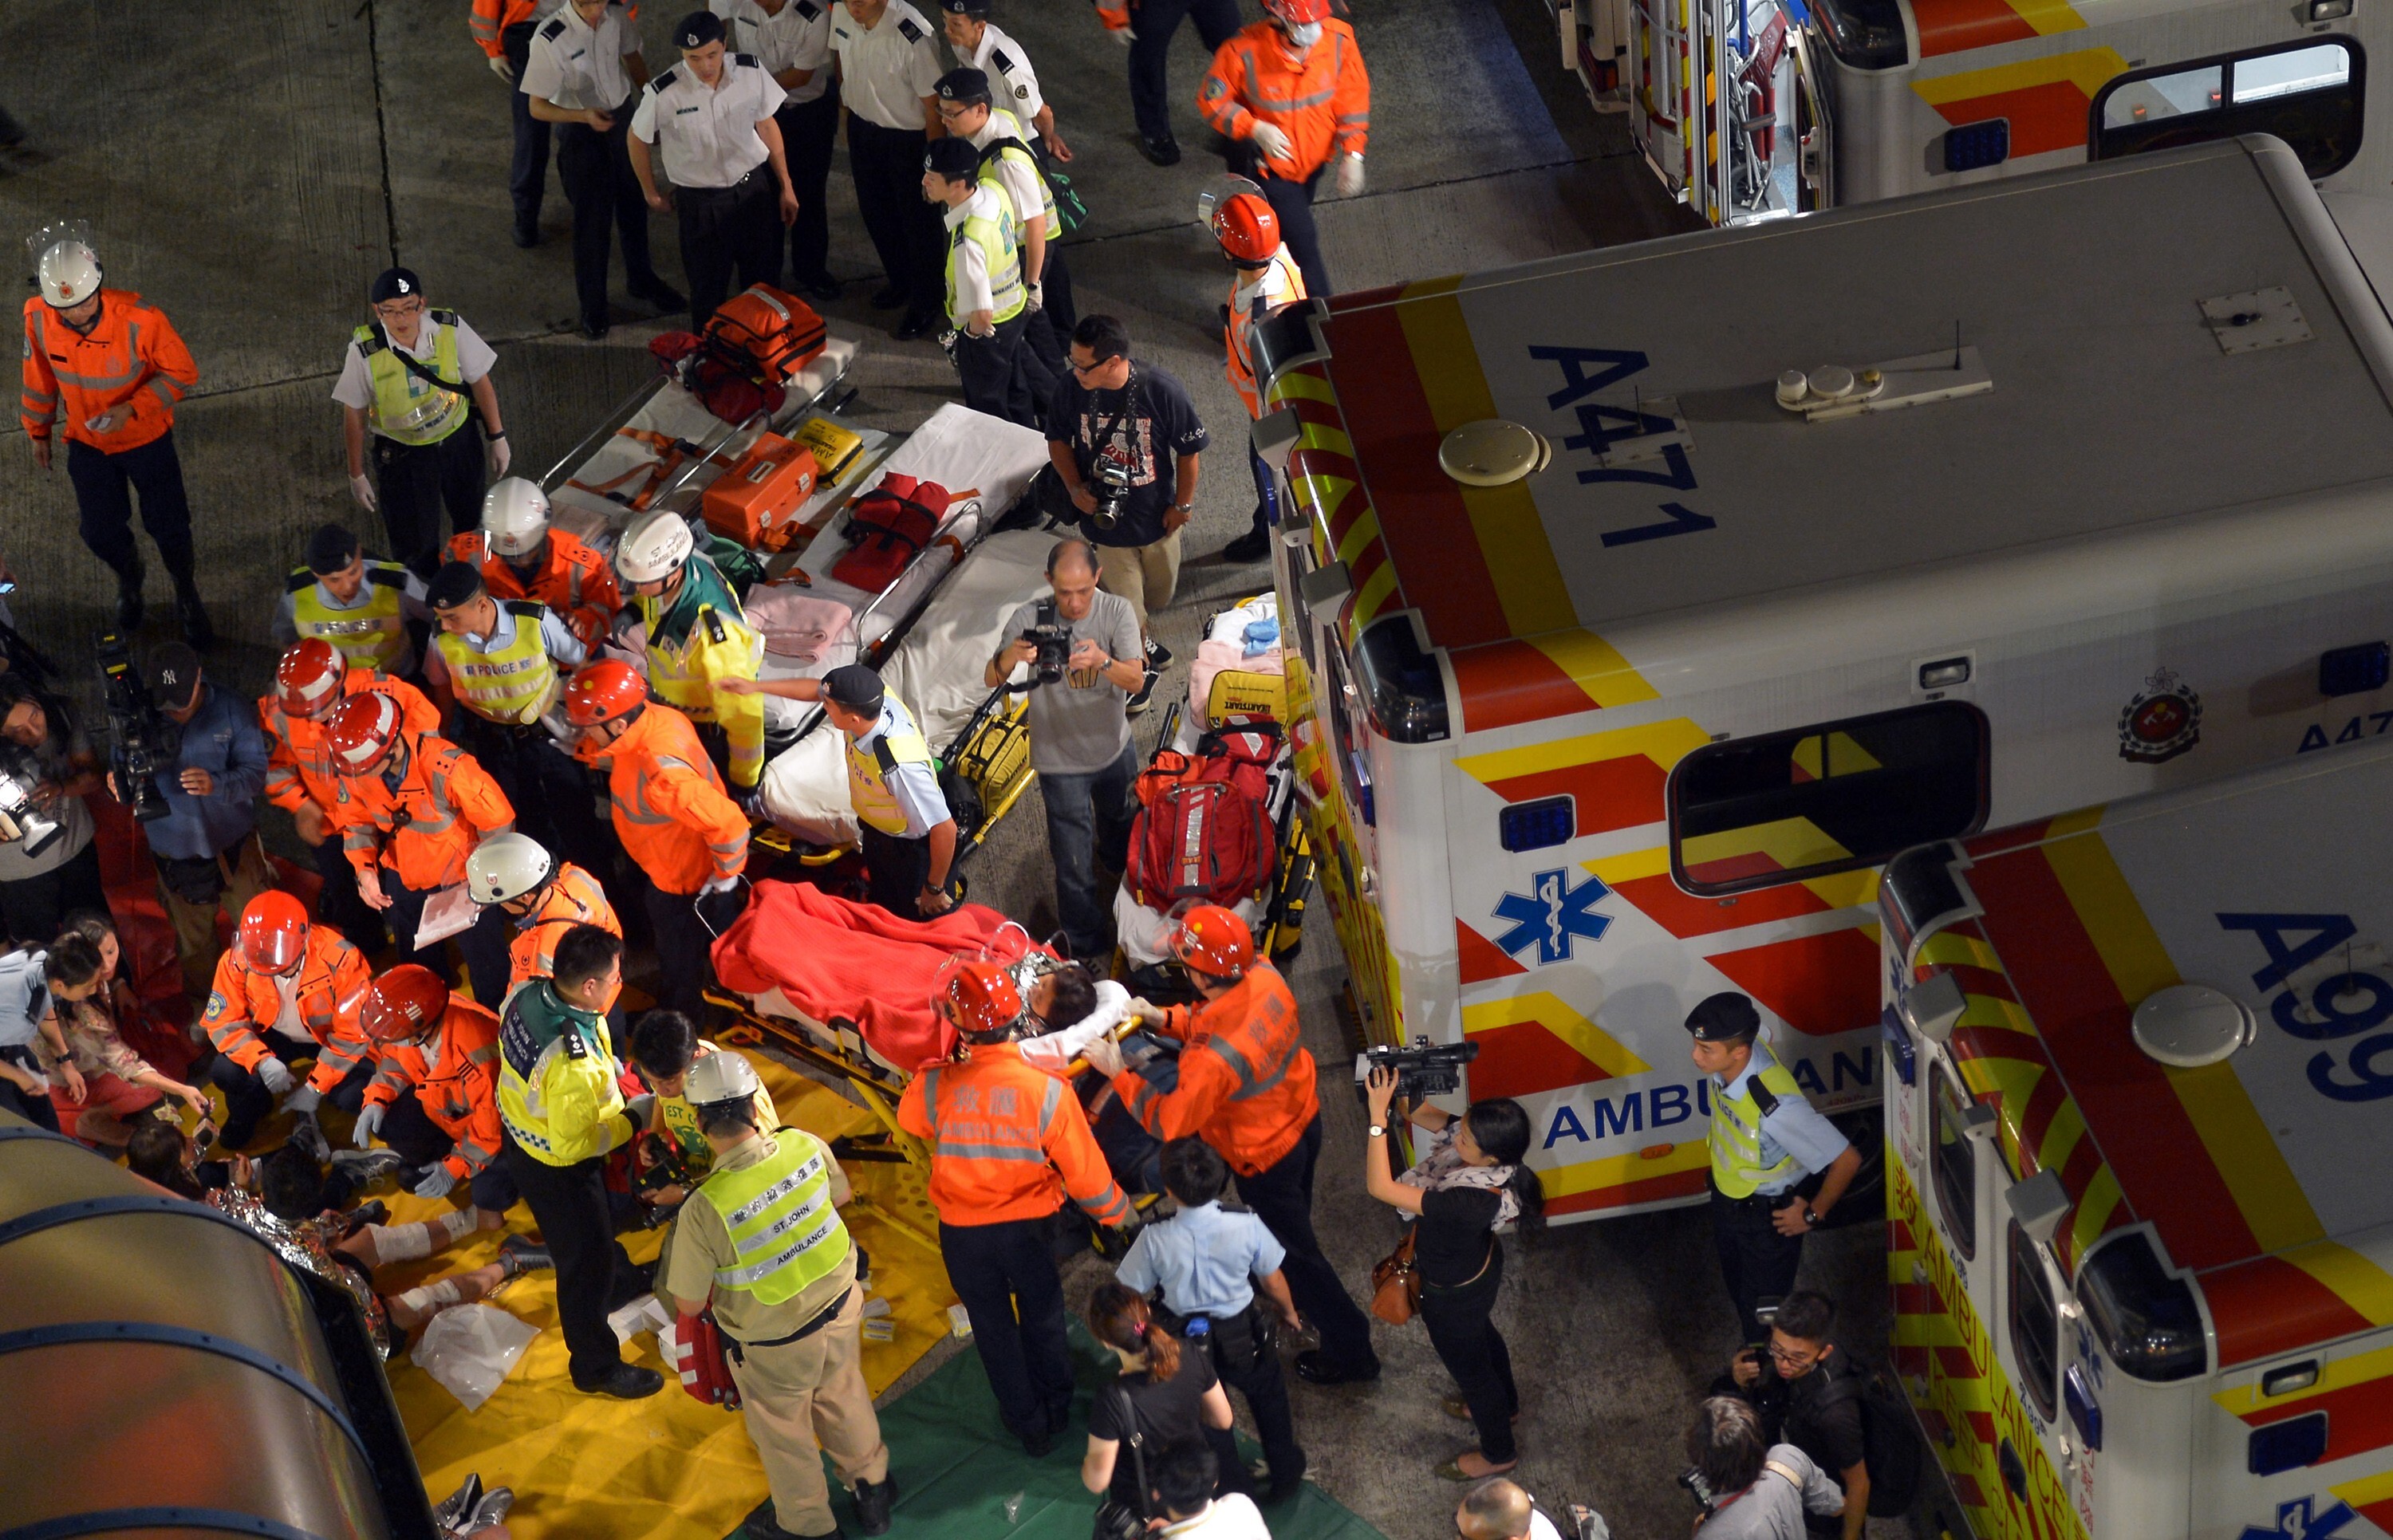 Rescuers work to carry victims to hospitals after the Sea Smooth ferry rammed into the Lamma IV off the coast of Lamma Island in 2012. Photo: Xinhua